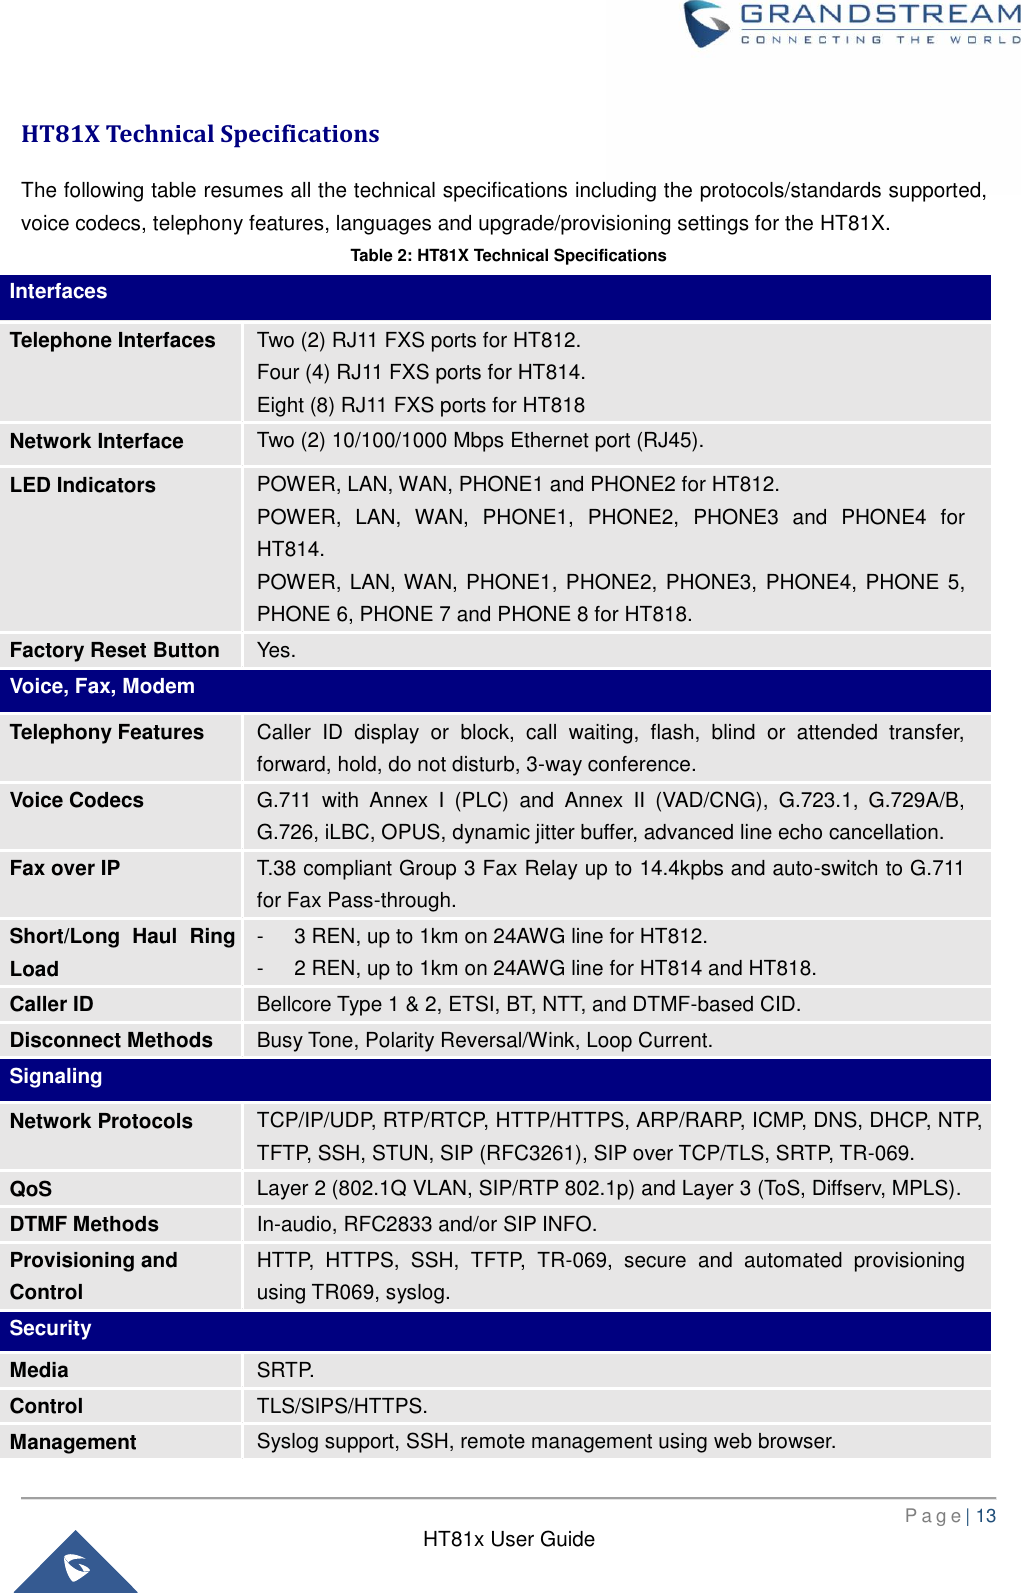       P a g e | 13      HT81x User Guide   HT81X Technical Specifications   The following table resumes all the technical specifications including the protocols/standards supported, voice codecs, telephony features, languages and upgrade/provisioning settings for the HT81X. Table 2: HT81X Technical Specifications Interfaces Telephone Interfaces Two (2) RJ11 FXS ports for HT812. Four (4) RJ11 FXS ports for HT814. Eight (8) RJ11 FXS ports for HT818   Network Interface Two (2) 10/100/1000 Mbps Ethernet port (RJ45). LED Indicators POWER, LAN, WAN, PHONE1 and PHONE2 for HT812. POWER,  LAN,  WAN,  PHONE1,  PHONE2,  PHONE3  and  PHONE4  for HT814. POWER, LAN, WAN, PHONE1, PHONE2, PHONE3, PHONE4, PHONE 5, PHONE 6, PHONE 7 and PHONE 8 for HT818. Factory Reset Button Yes. Voice, Fax, Modem Telephony Features Caller  ID  display  or  block,  call  waiting,  flash,  blind  or  attended  transfer, forward, hold, do not disturb, 3-way conference. Voice Codecs G.711  with  Annex  I  (PLC)  and  Annex  II  (VAD/CNG),  G.723.1,  G.729A/B, G.726, iLBC, OPUS, dynamic jitter buffer, advanced line echo cancellation. Fax over IP T.38 compliant Group 3 Fax Relay up to 14.4kpbs and auto-switch to G.711 for Fax Pass-through. Short/Long  Haul  Ring Load -  3 REN, up to 1km on 24AWG line for HT812. -  2 REN, up to 1km on 24AWG line for HT814 and HT818. Caller ID Bellcore Type 1 &amp; 2, ETSI, BT, NTT, and DTMF-based CID. Disconnect Methods Busy Tone, Polarity Reversal/Wink, Loop Current. Signaling Network Protocols TCP/IP/UDP, RTP/RTCP, HTTP/HTTPS, ARP/RARP, ICMP, DNS, DHCP, NTP, TFTP, SSH, STUN, SIP (RFC3261), SIP over TCP/TLS, SRTP, TR-069. QoS Layer 2 (802.1Q VLAN, SIP/RTP 802.1p) and Layer 3 (ToS, Diffserv, MPLS). DTMF Methods In-audio, RFC2833 and/or SIP INFO. Provisioning and Control HTTP,  HTTPS,  SSH,  TFTP,  TR-069,  secure  and  automated  provisioning using TR069, syslog. Security Media SRTP. Control TLS/SIPS/HTTPS. Management Syslog support, SSH, remote management using web browser. 